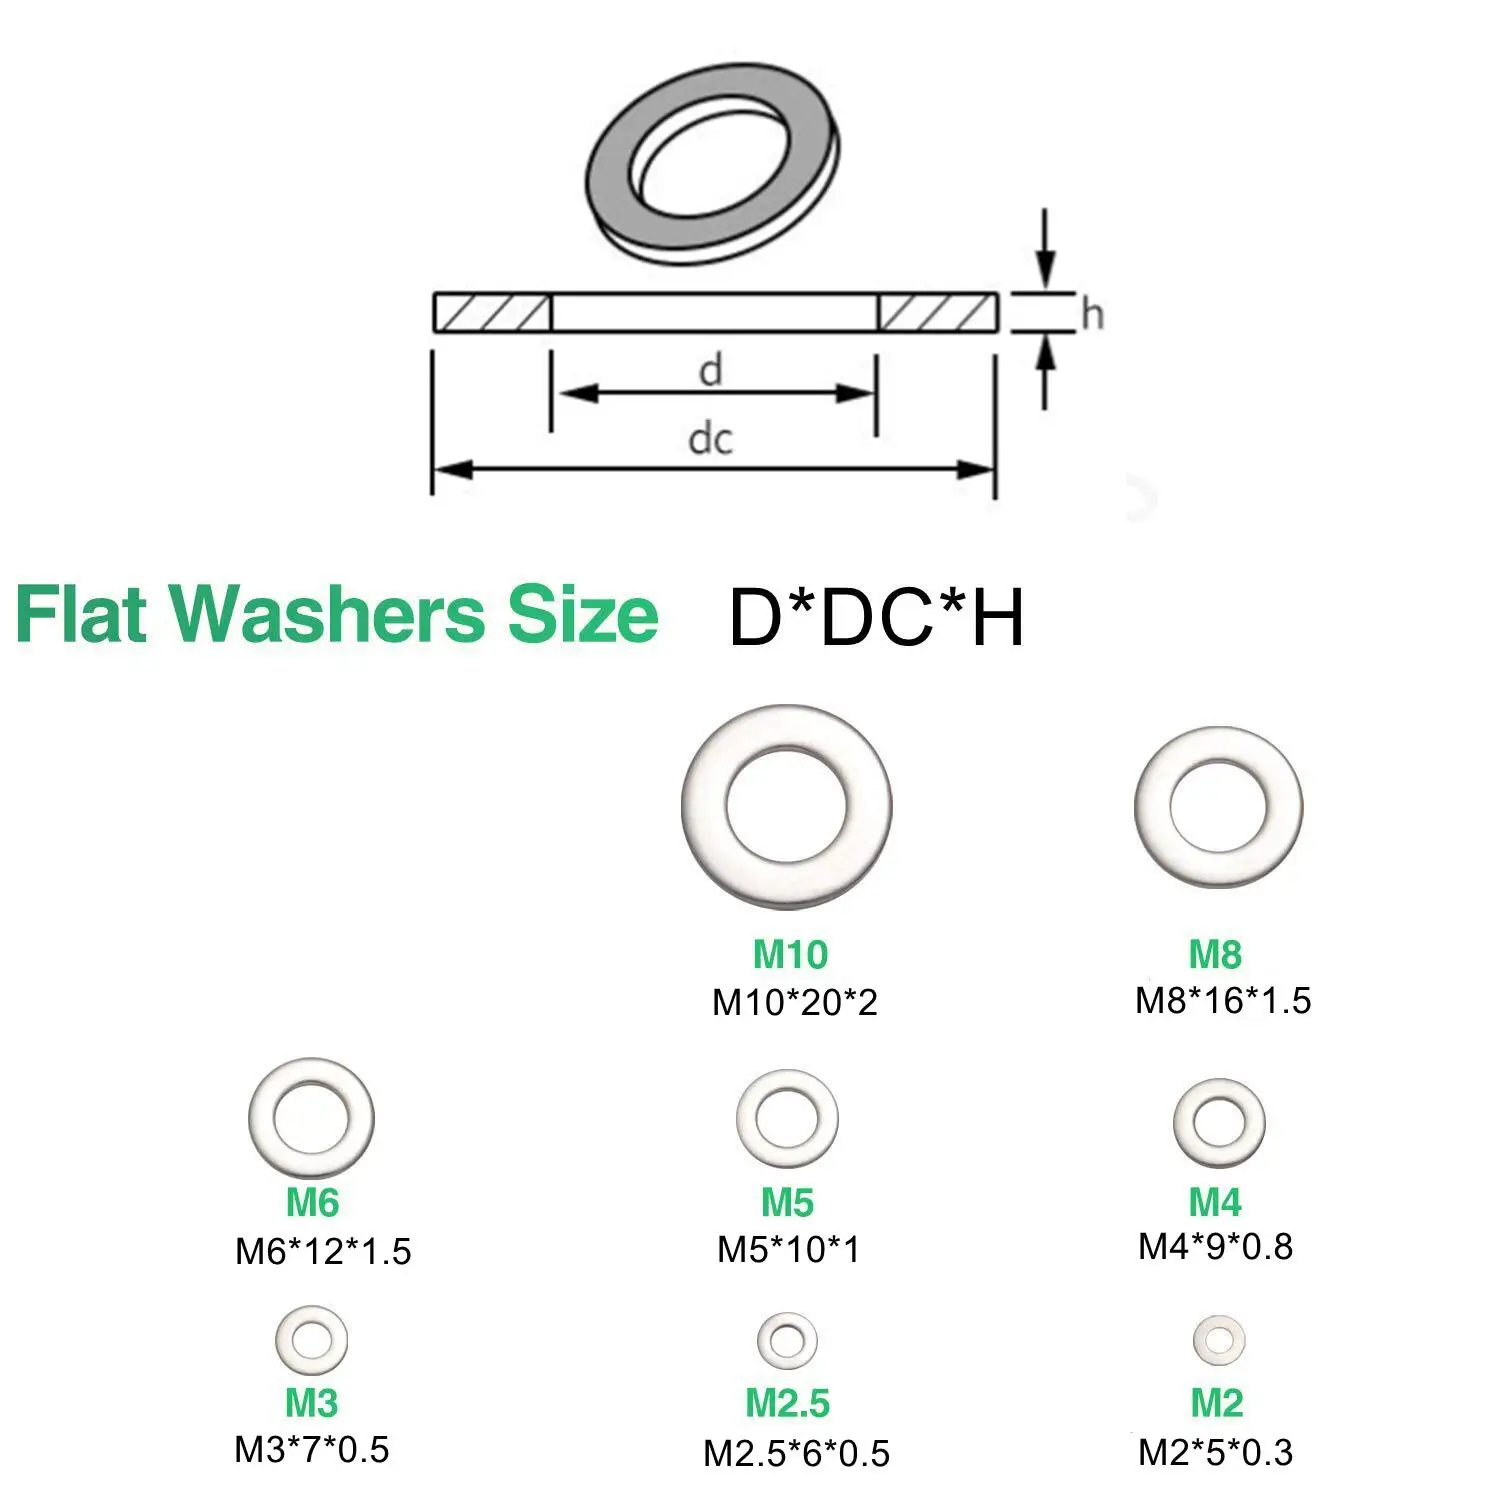 180/200/220 Pcs Stainless Steel Flat Plain Washer Gasket Rings Assortment Kits For Sump Plugs M2 M2.5 M3 M4 M5 M6 M8 M10